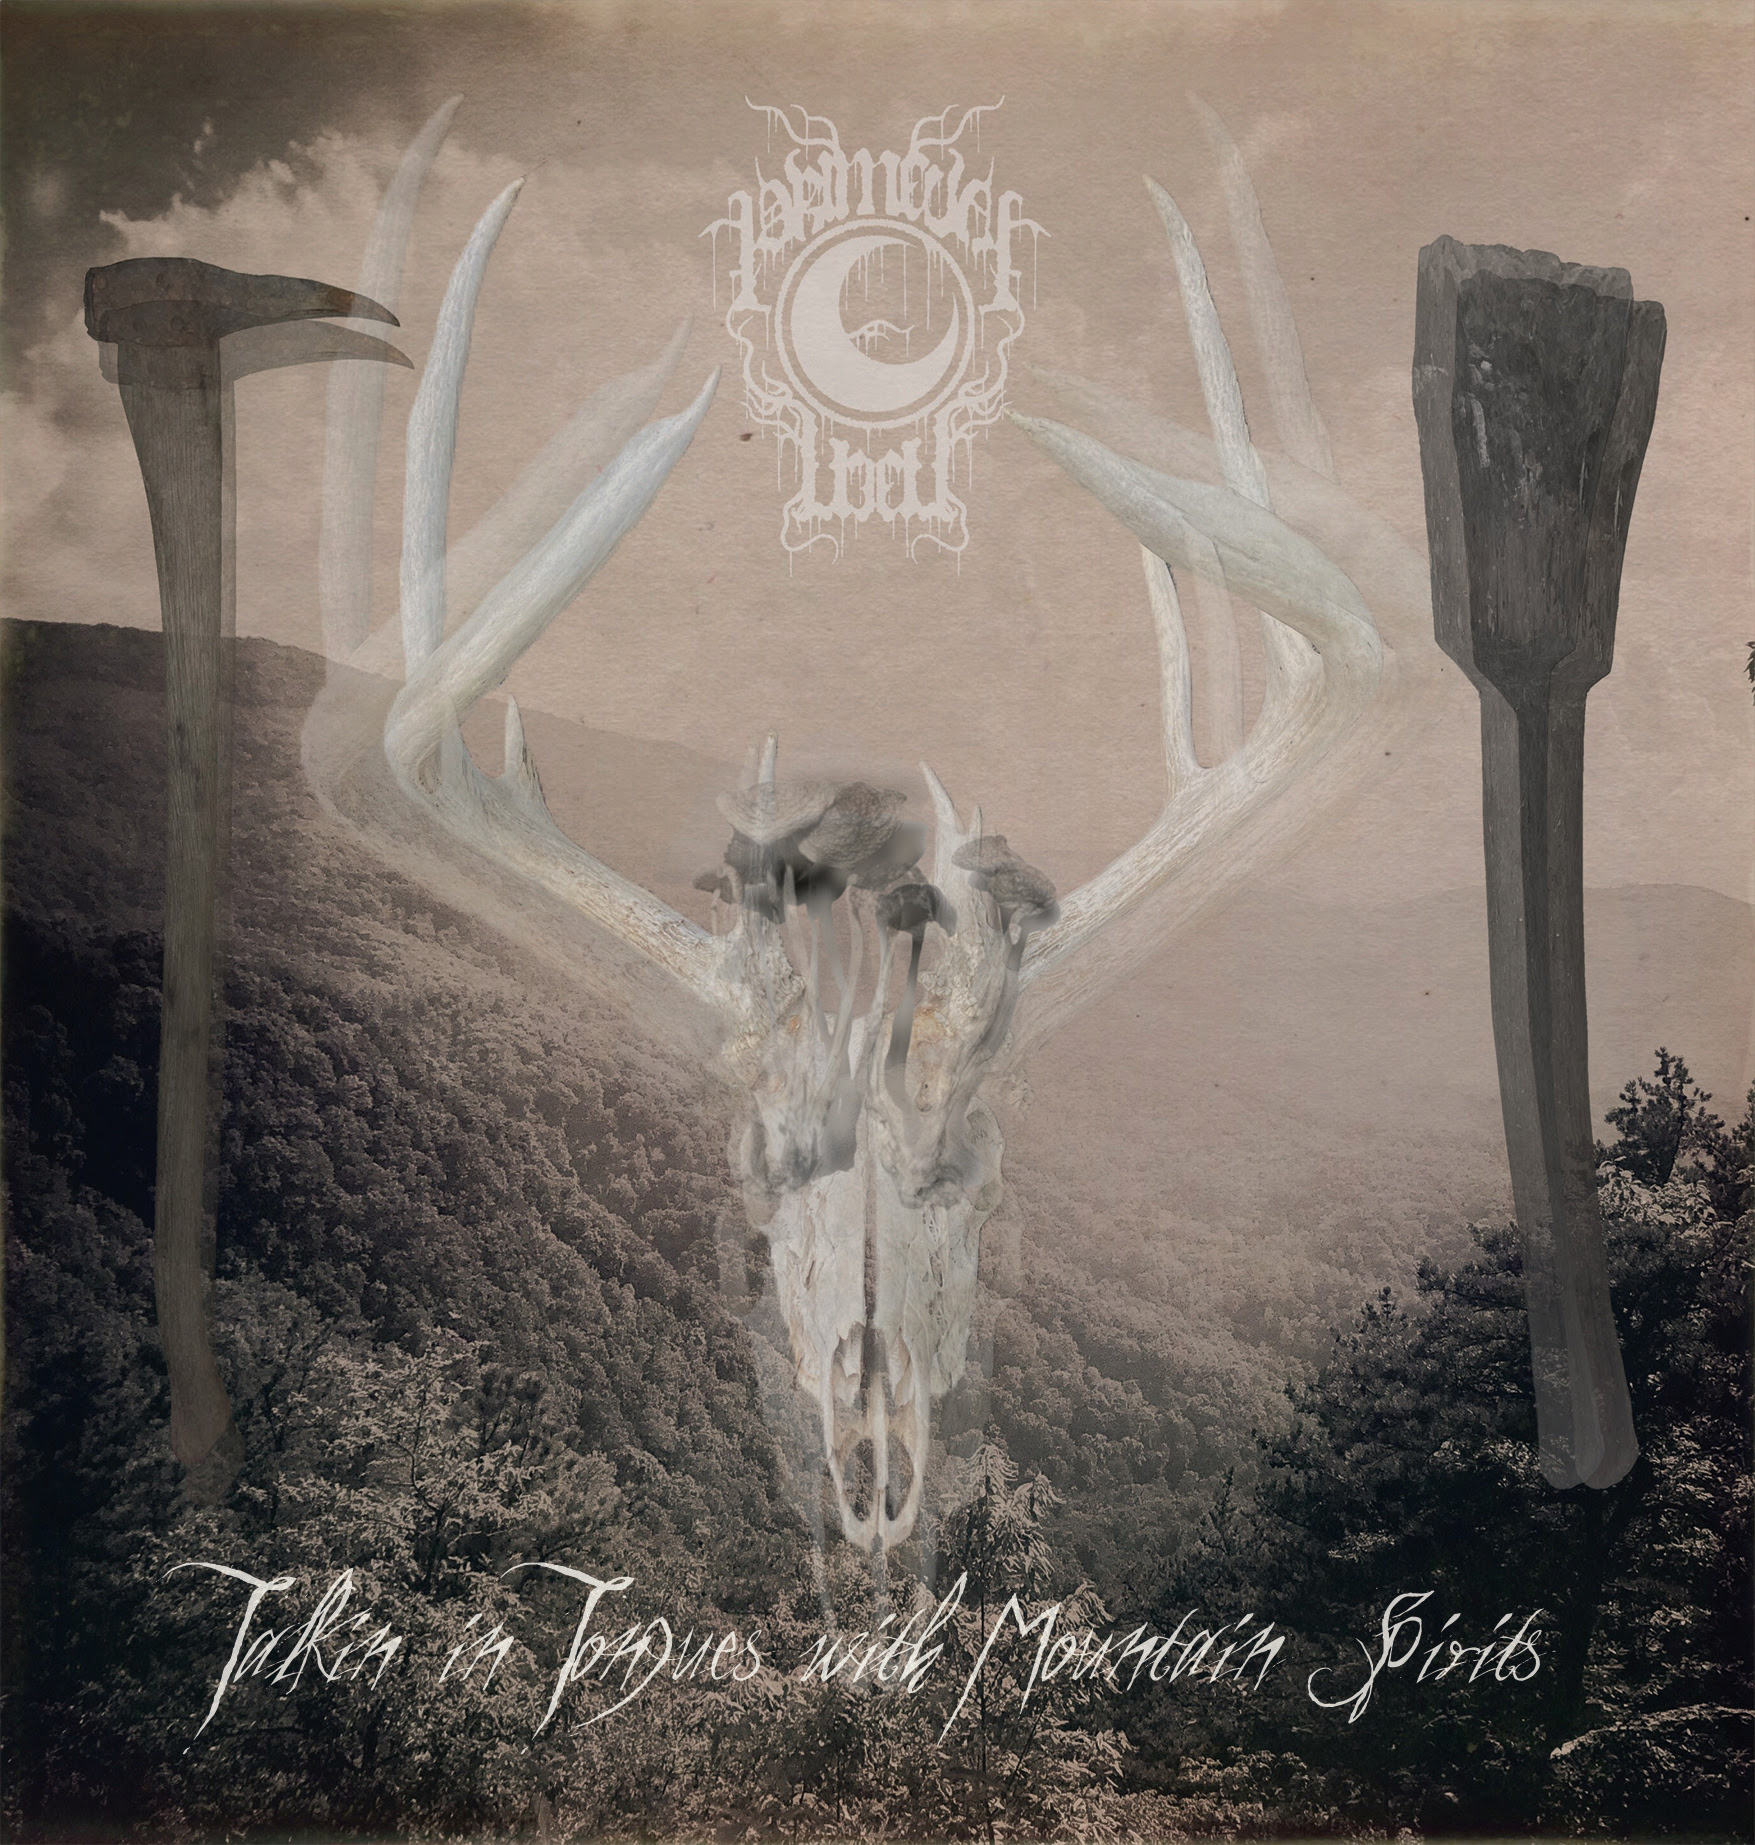 Primeval Well <i> Talkin' In Tongues with Mountain Spirits</i> art